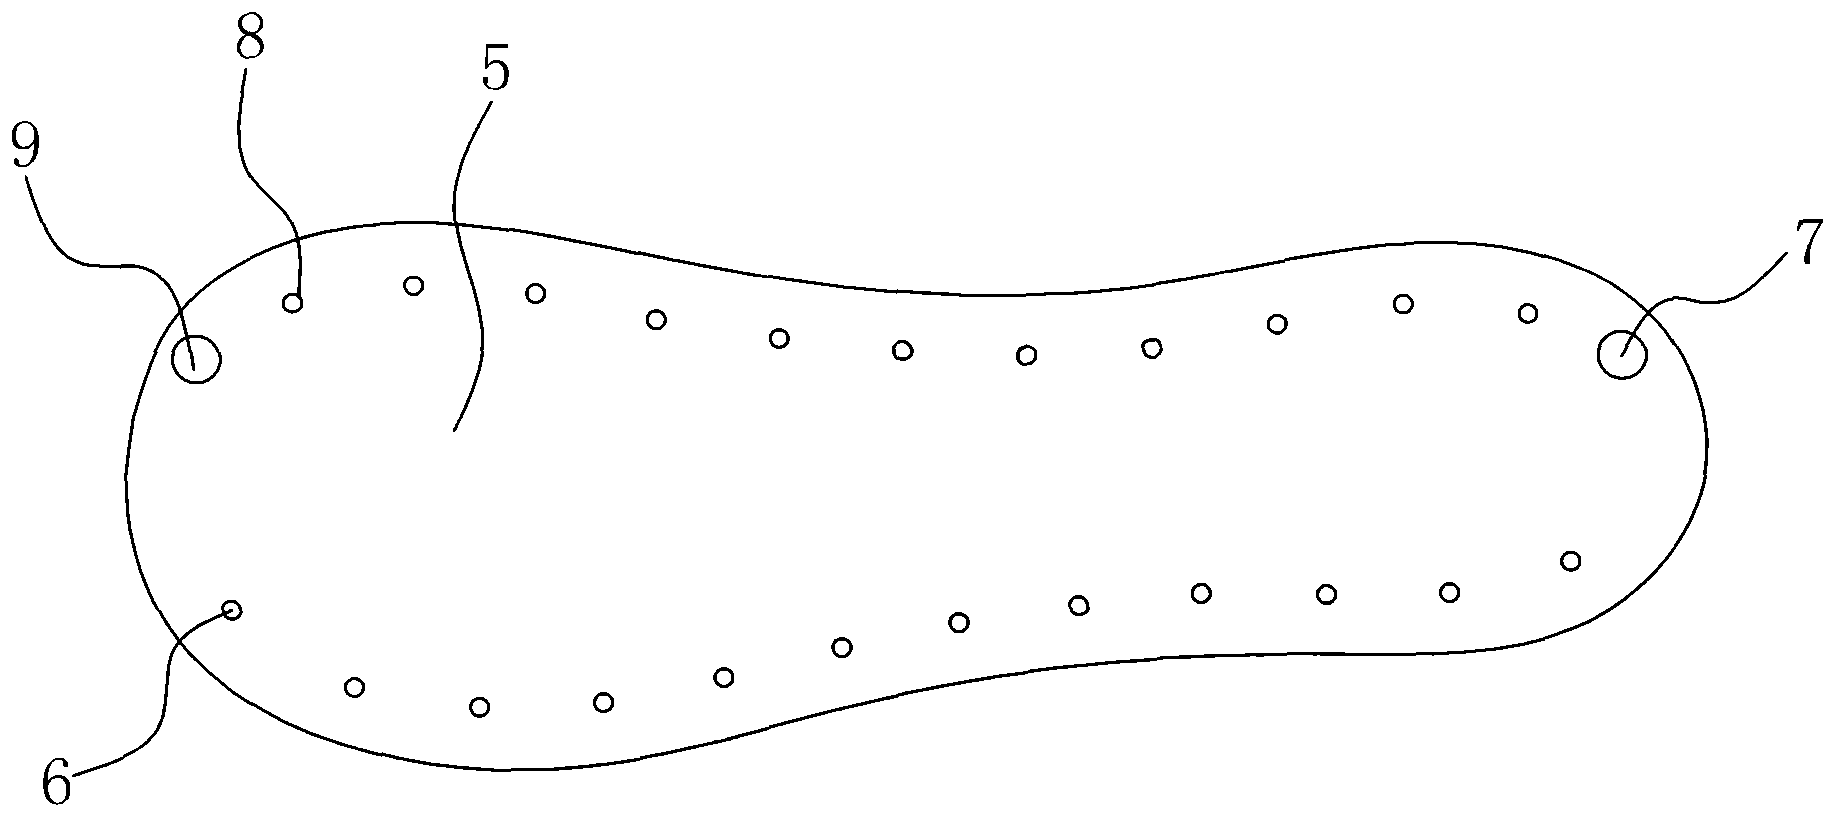 Environment-friendly midsole shoes and manufacturing method thereof